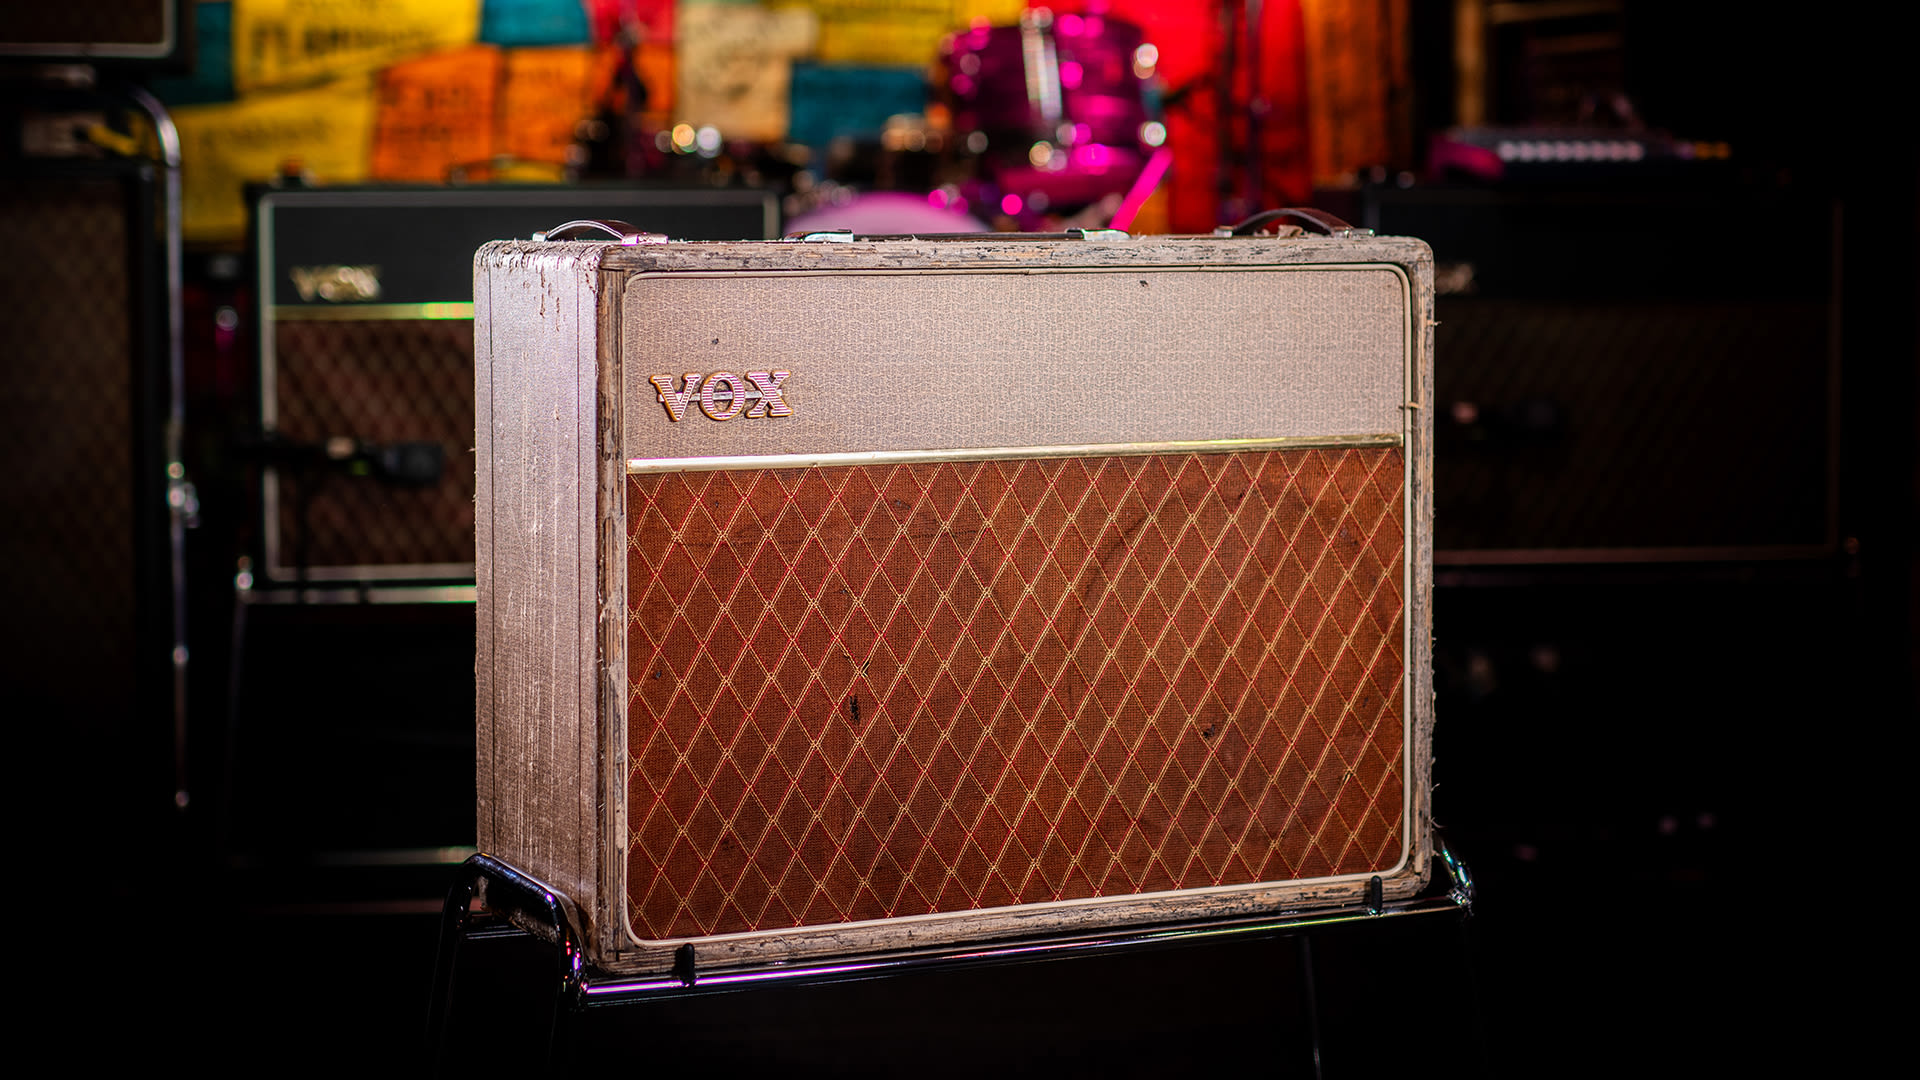 John Lennon’s lost Vox amp – used on the Beatles’ first recordings and Cavern gigs – may have been found